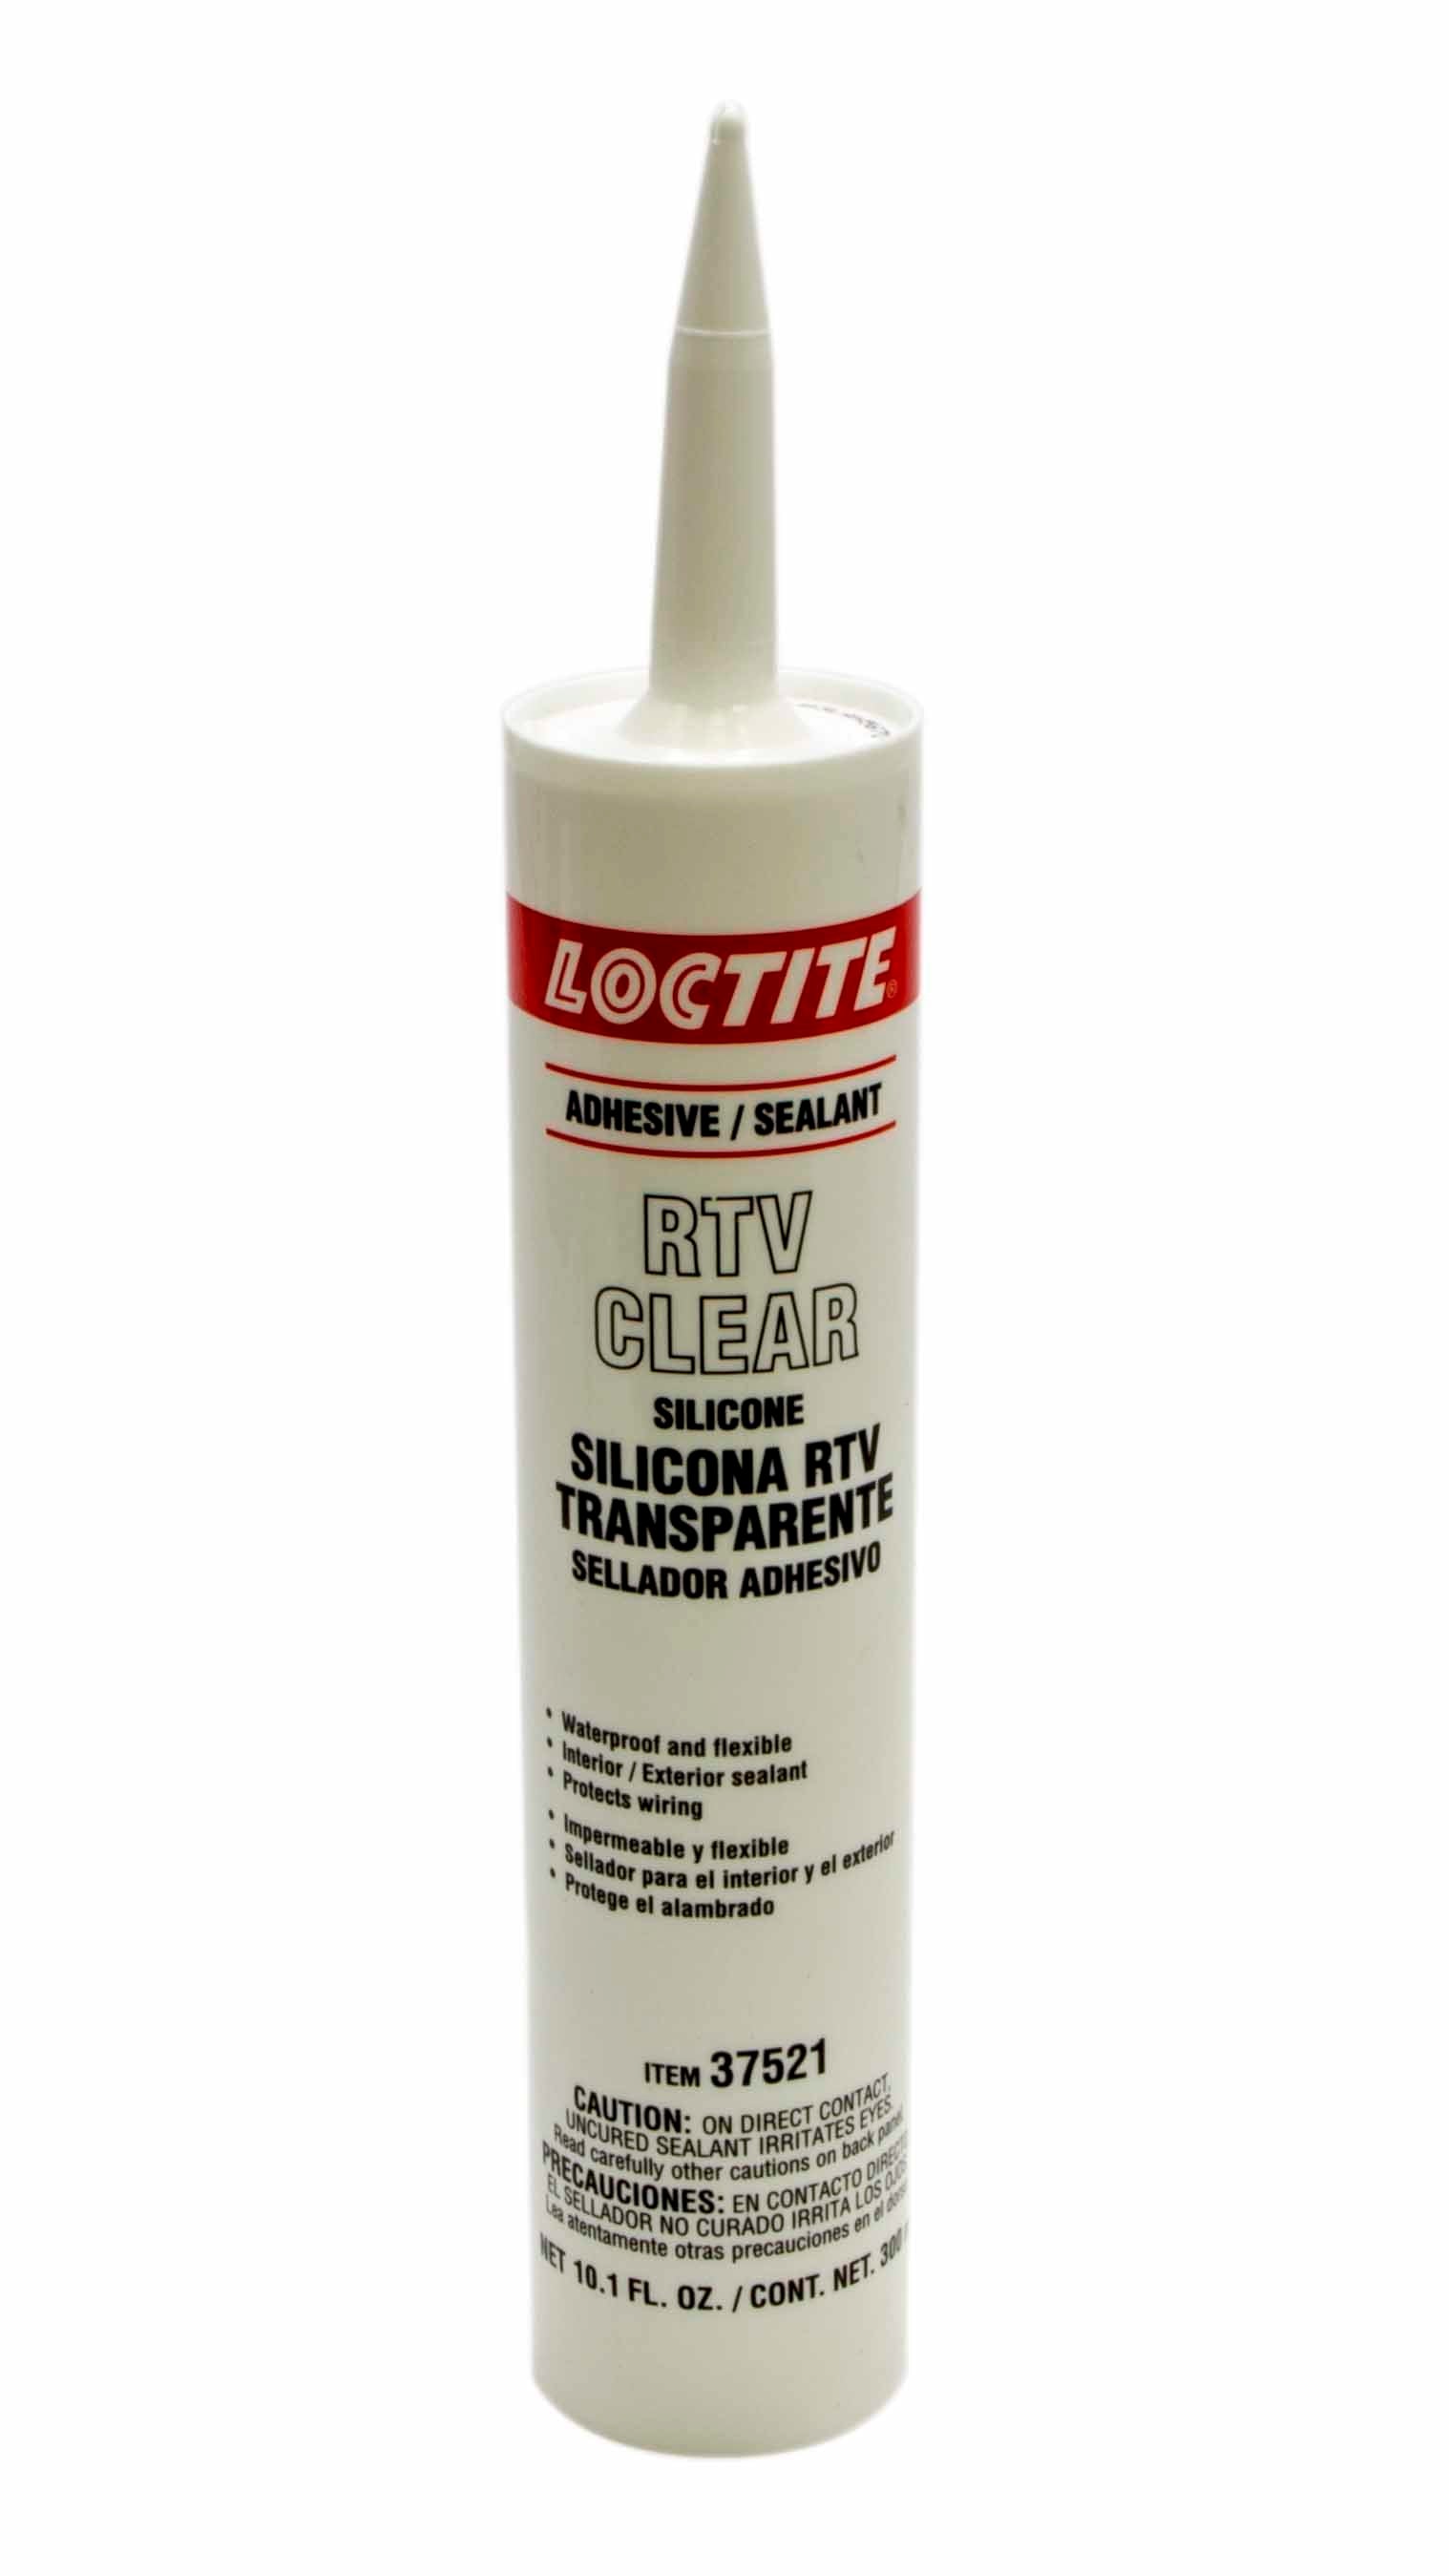 Loctite RTV Clear Silicone Adhesive Cartridge 300ml Sealers, Gasket Makers and Glues RTV and Silicone Sealers and Gasket Makers main image